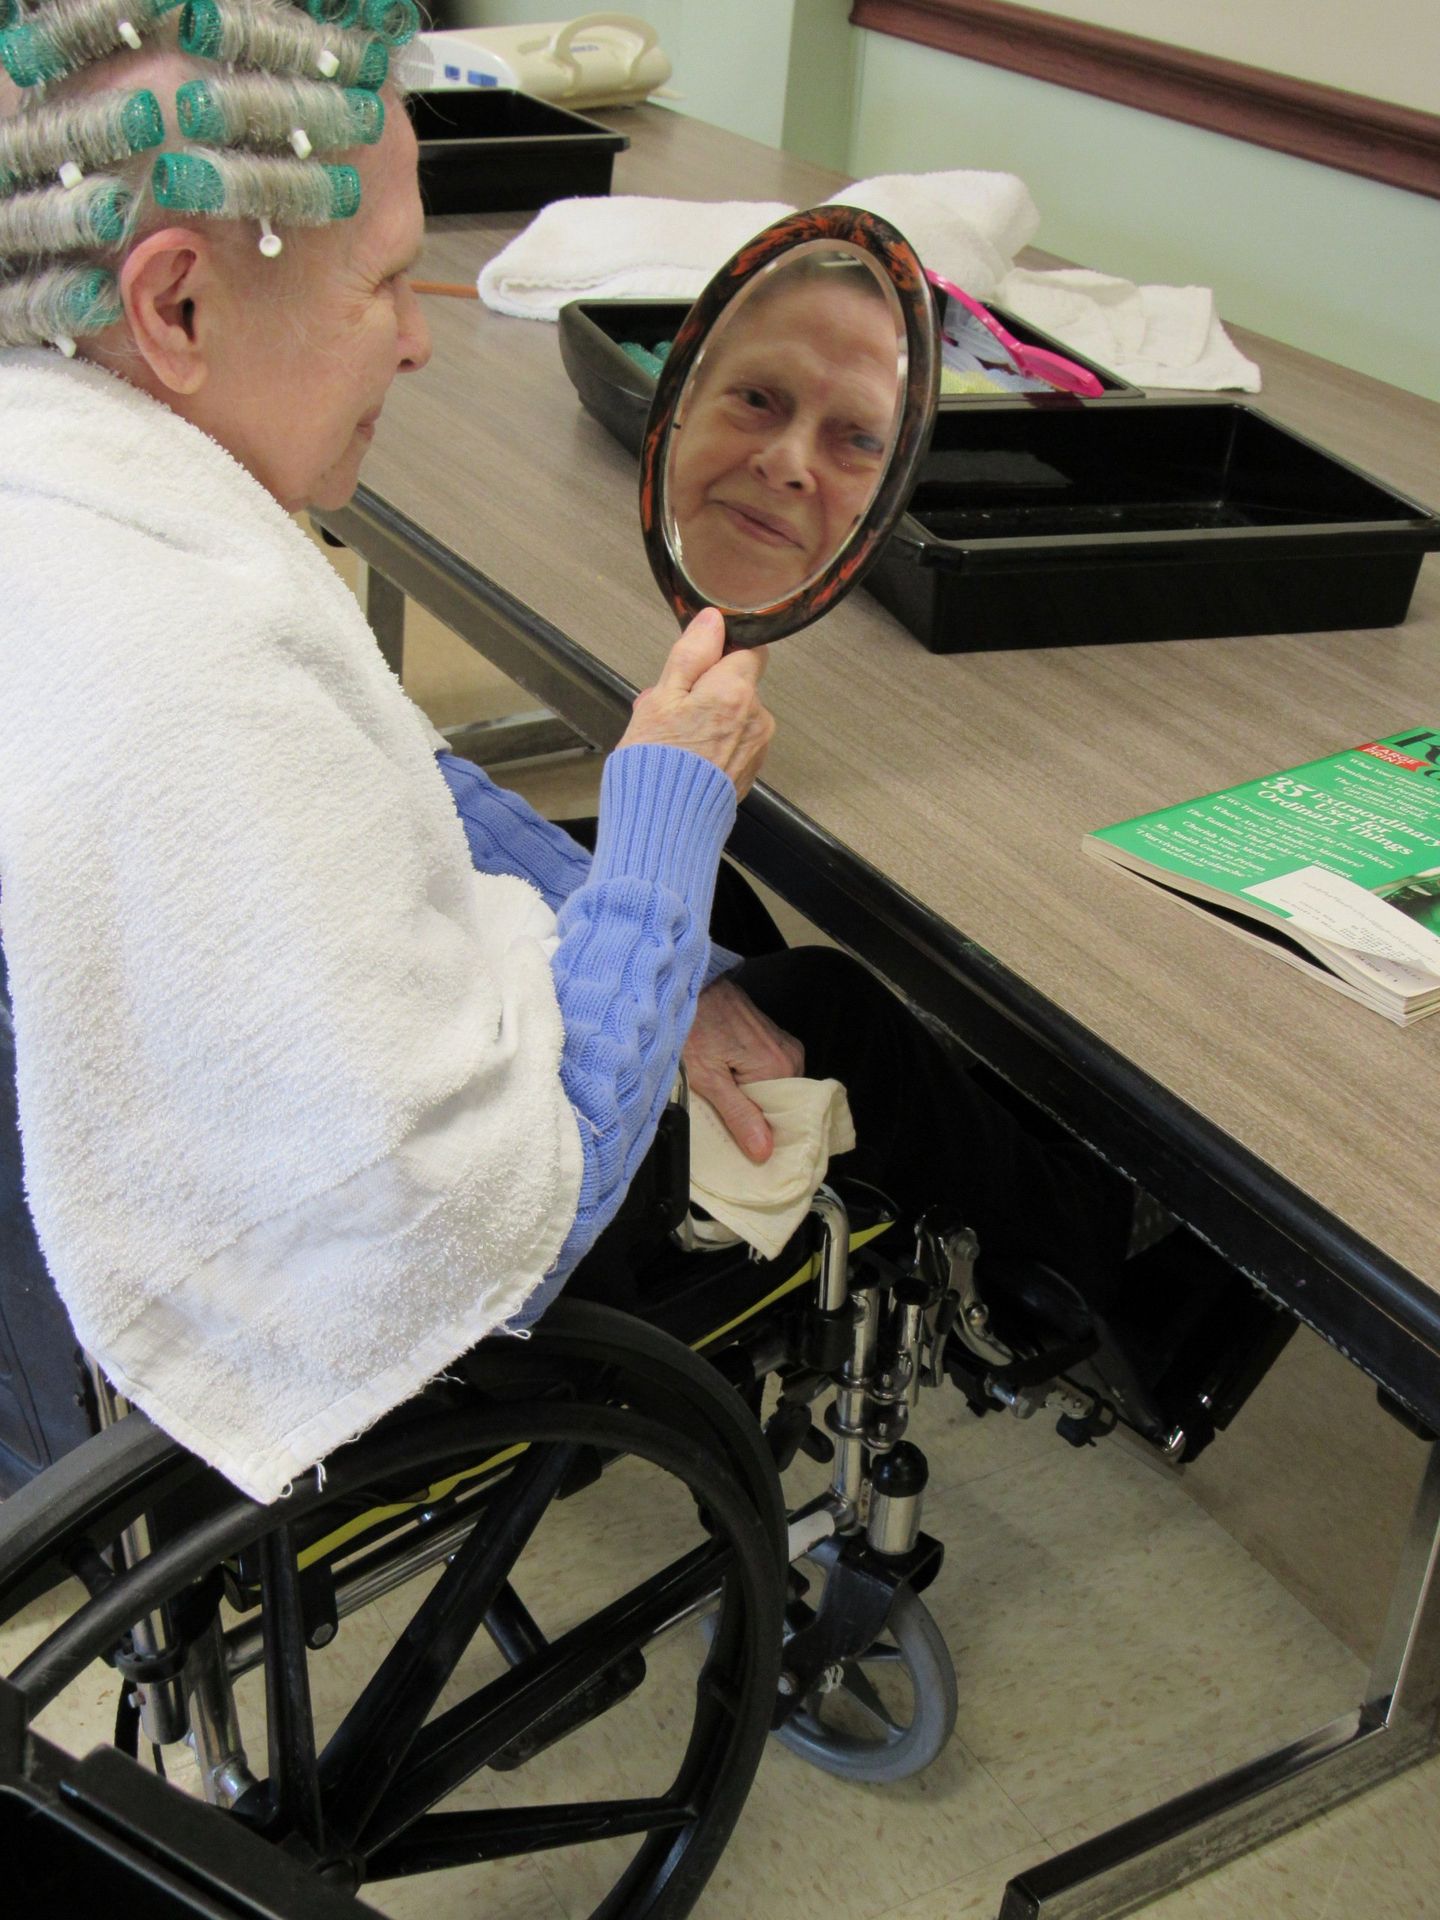 Elder getting her hair done and looking in mirror at Lenawee Medical Care Facility in Adrian, MI